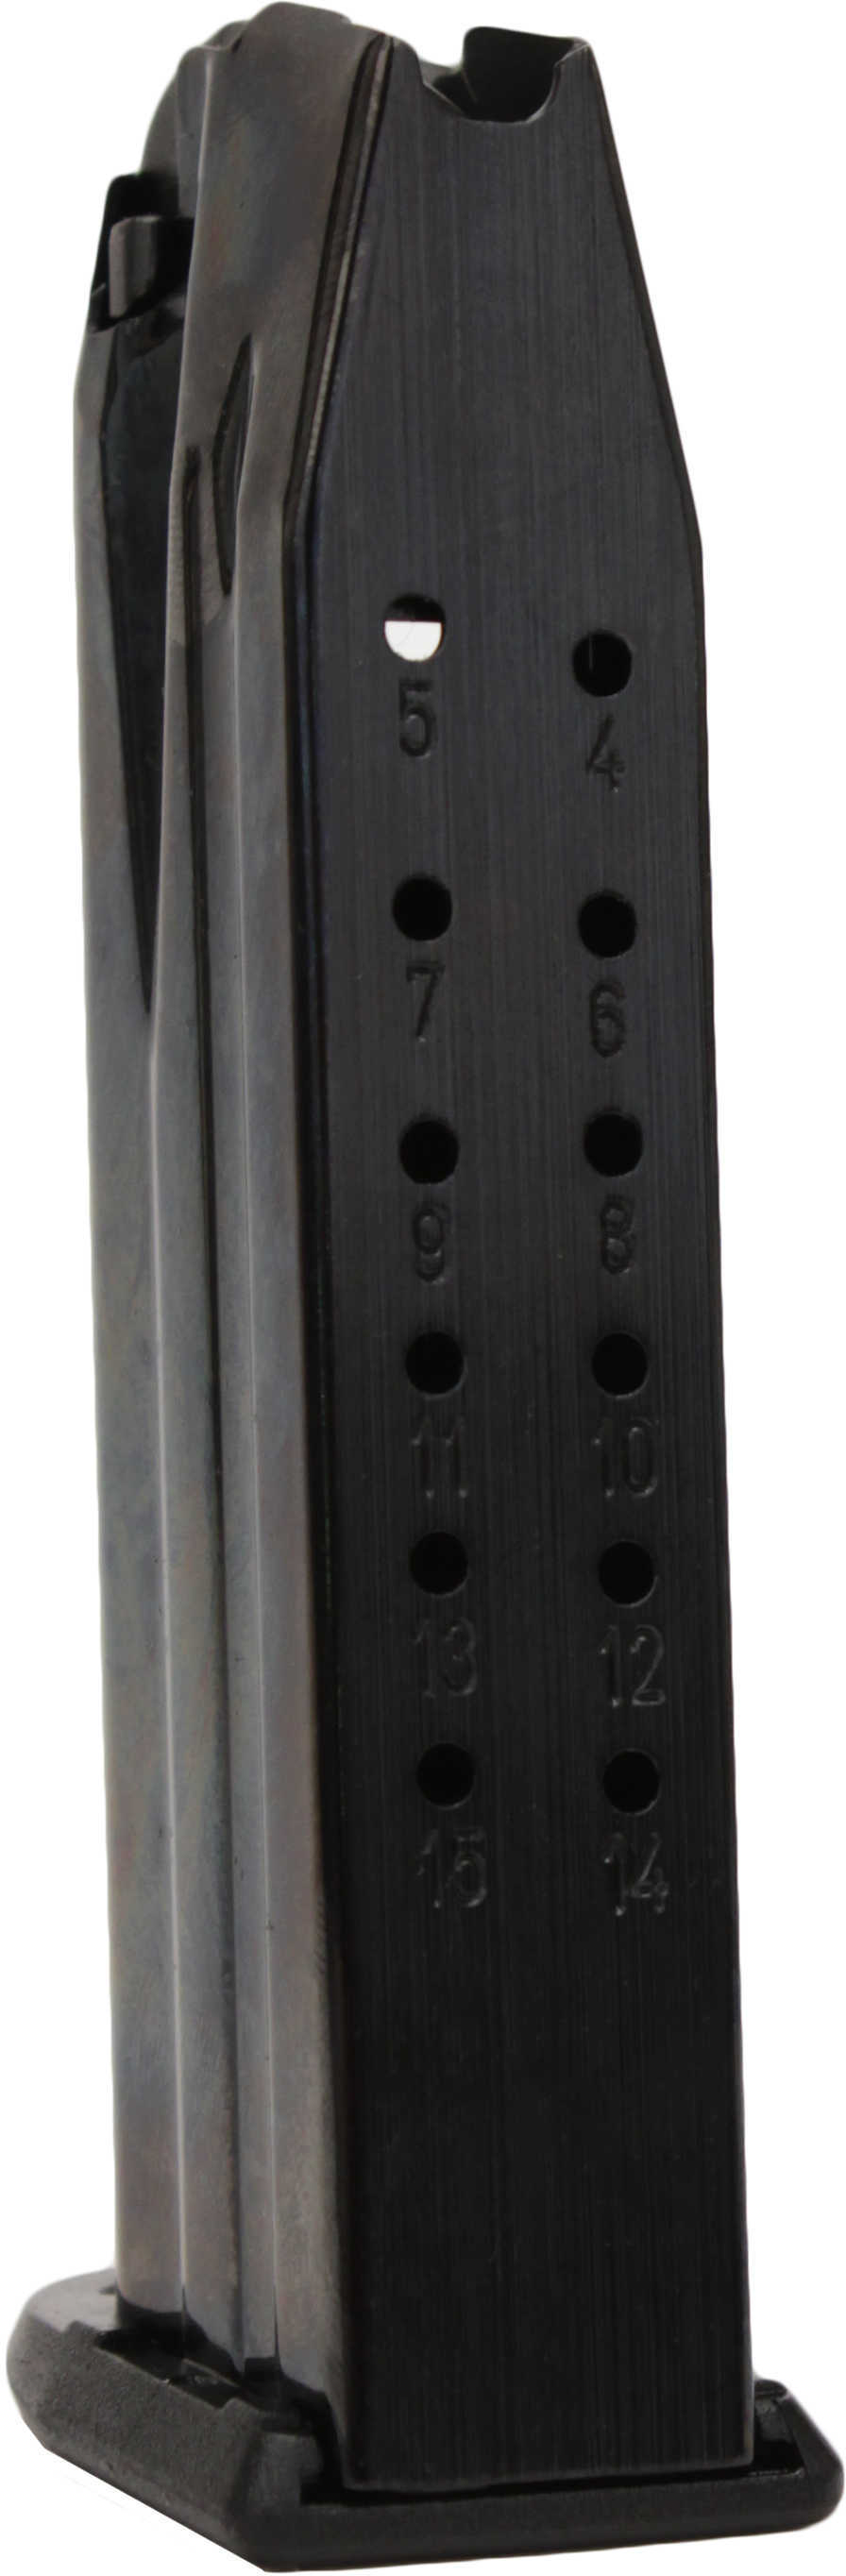 Walther P99 Magazine 9mm Black 15/Rd